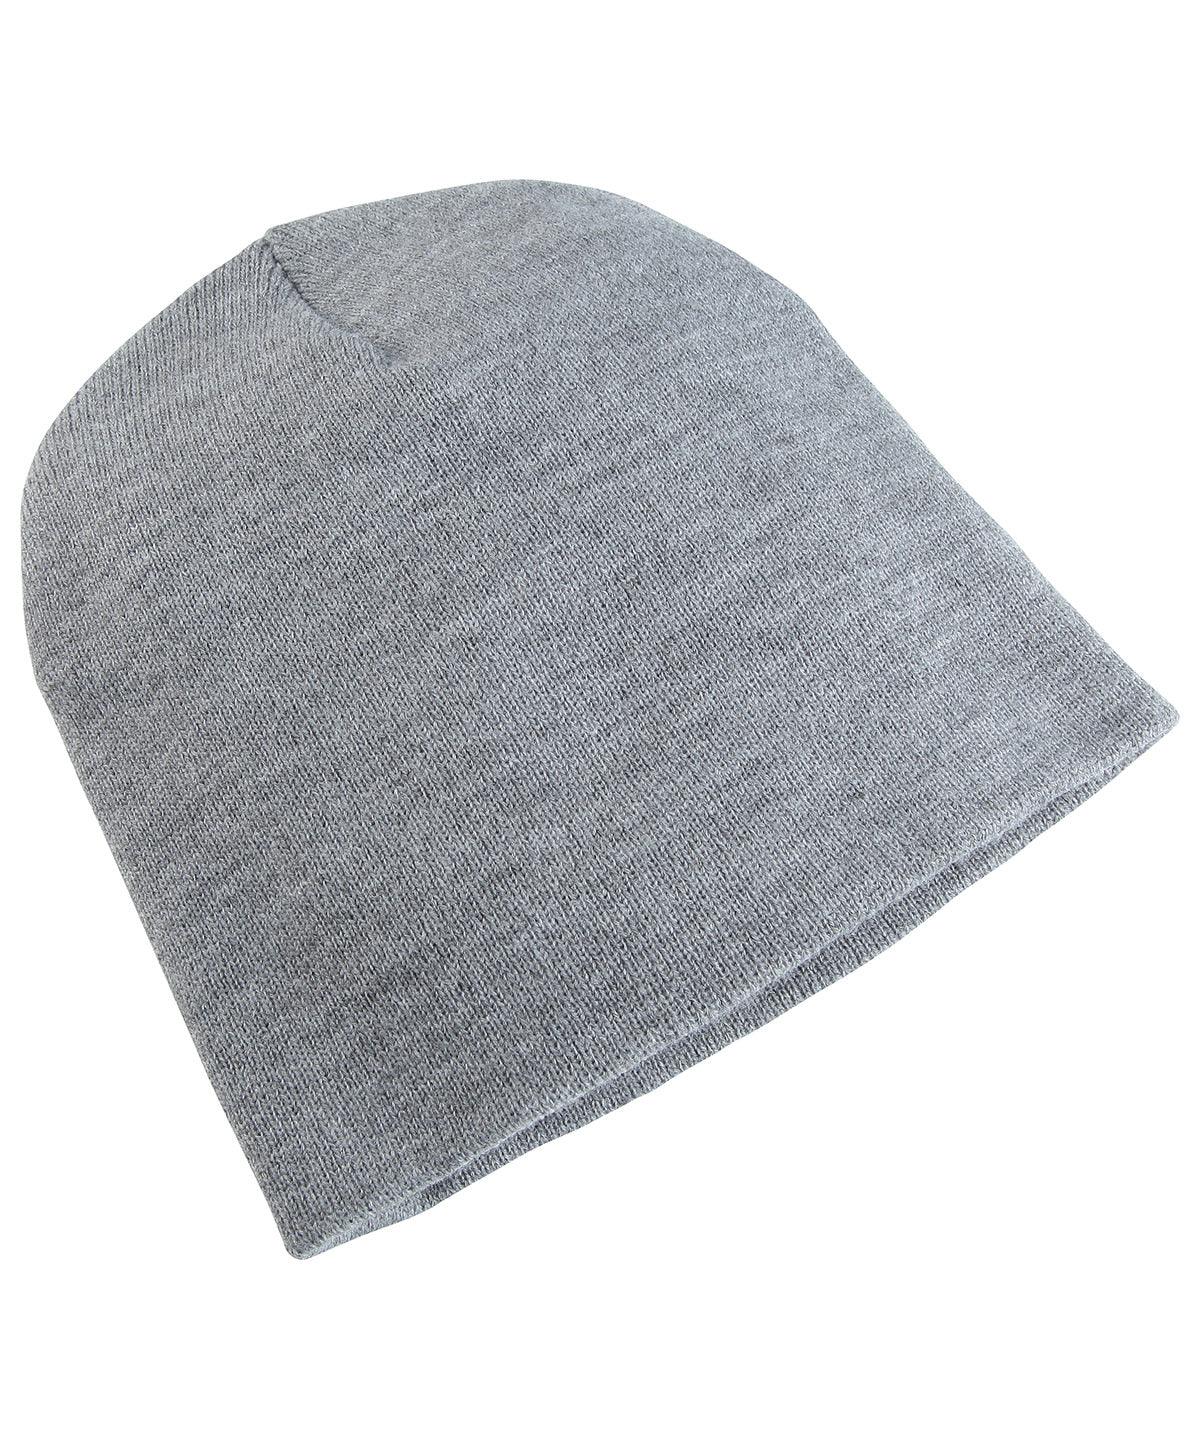 Heather Grey - Heavyweight beanie (1500KC) Hats Flexfit by Yupoong Headwear, New Colours for 2023, Winter Essentials Schoolwear Centres